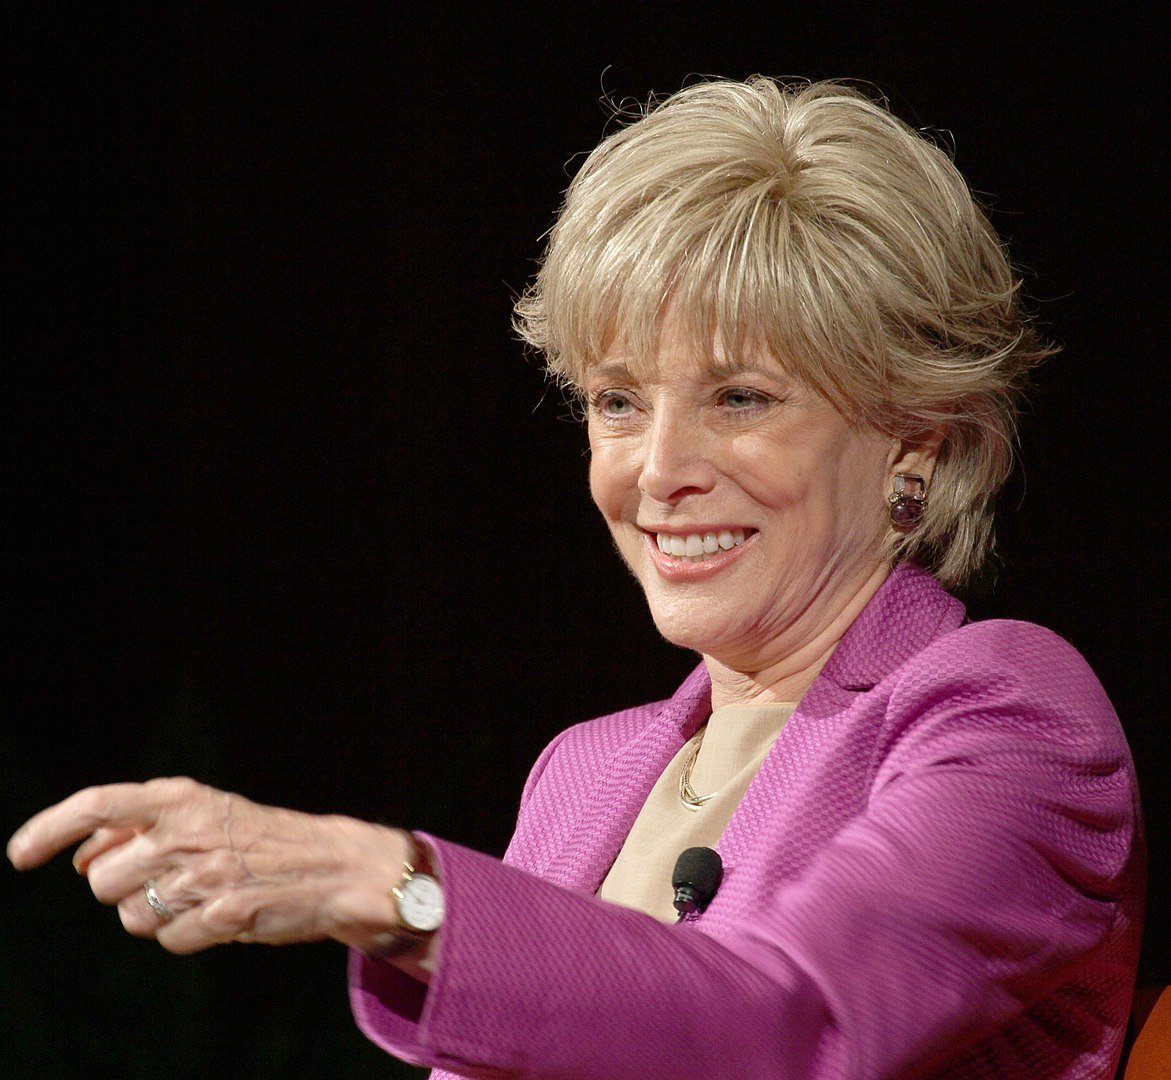 Lesley Stahl in October 2010 at the Lyndon Baines Johnson Library and Museum in Texas | Photo: Getty Images